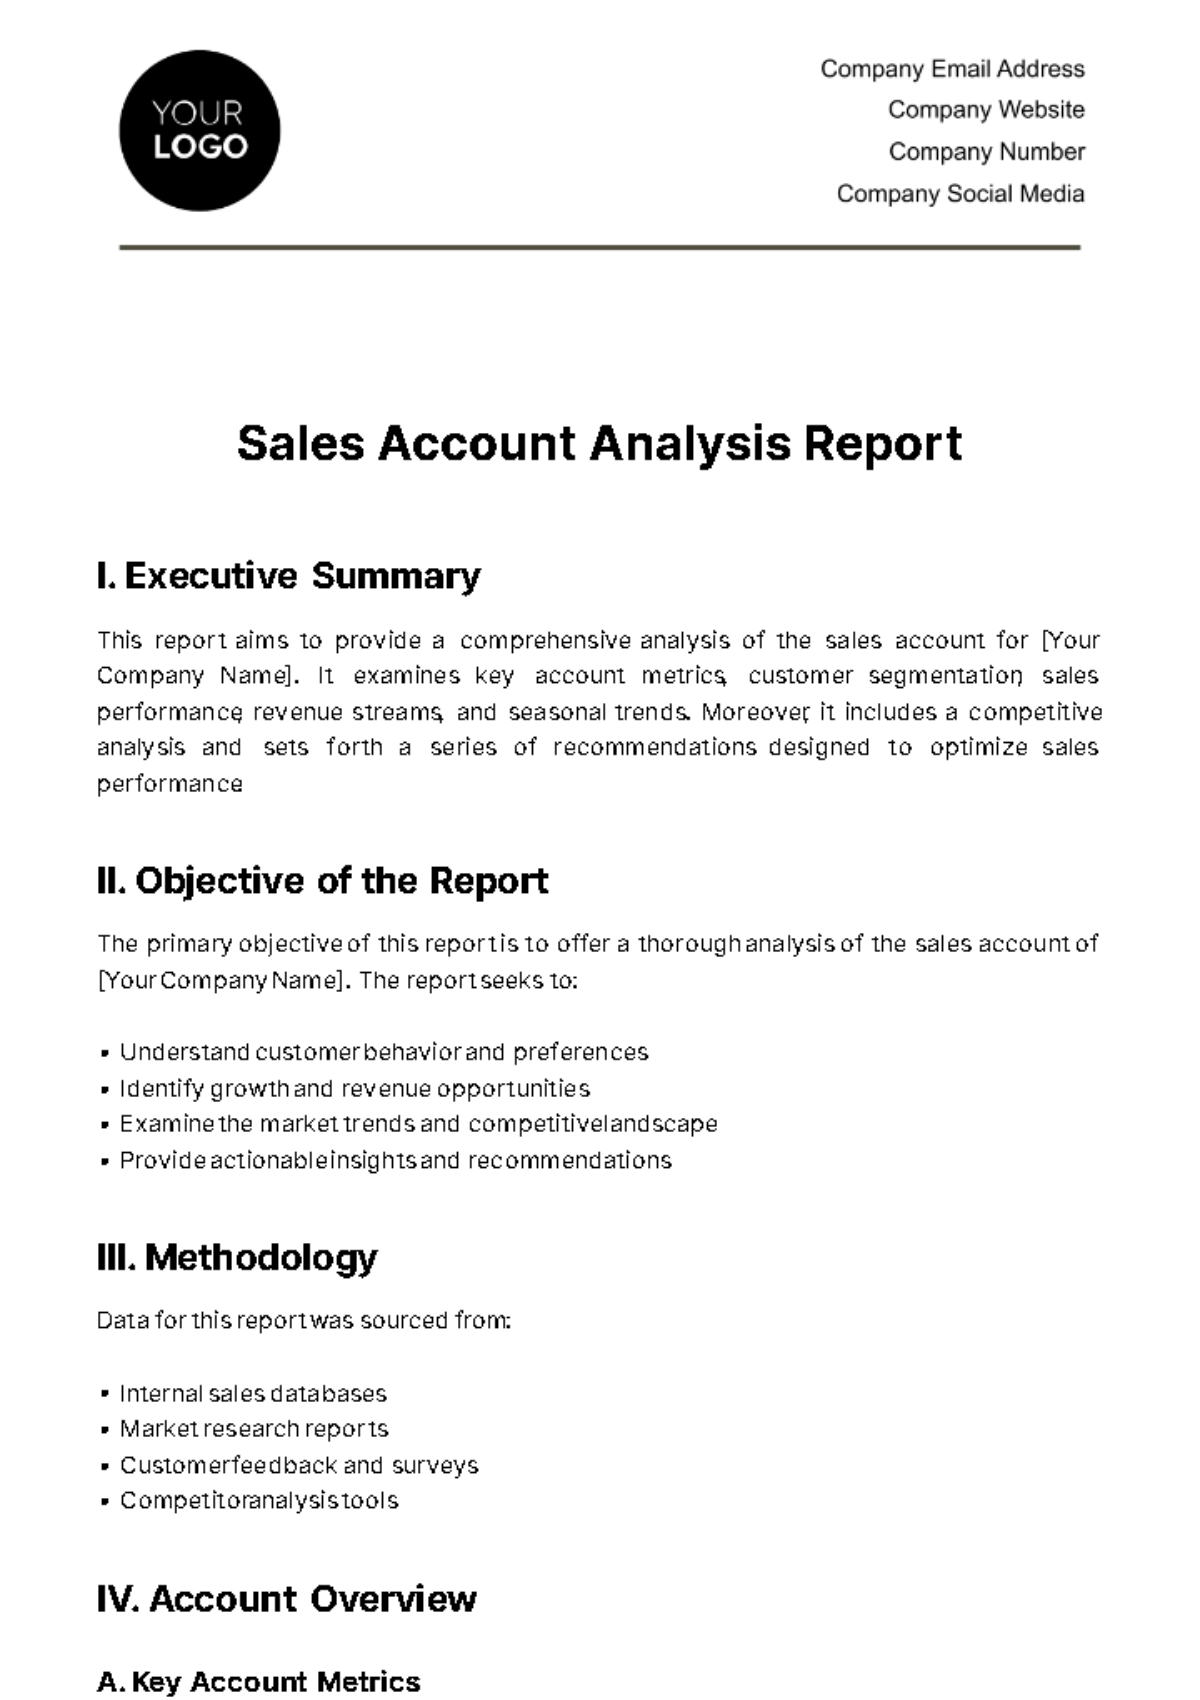 Free Sales Account Analysis Report Template